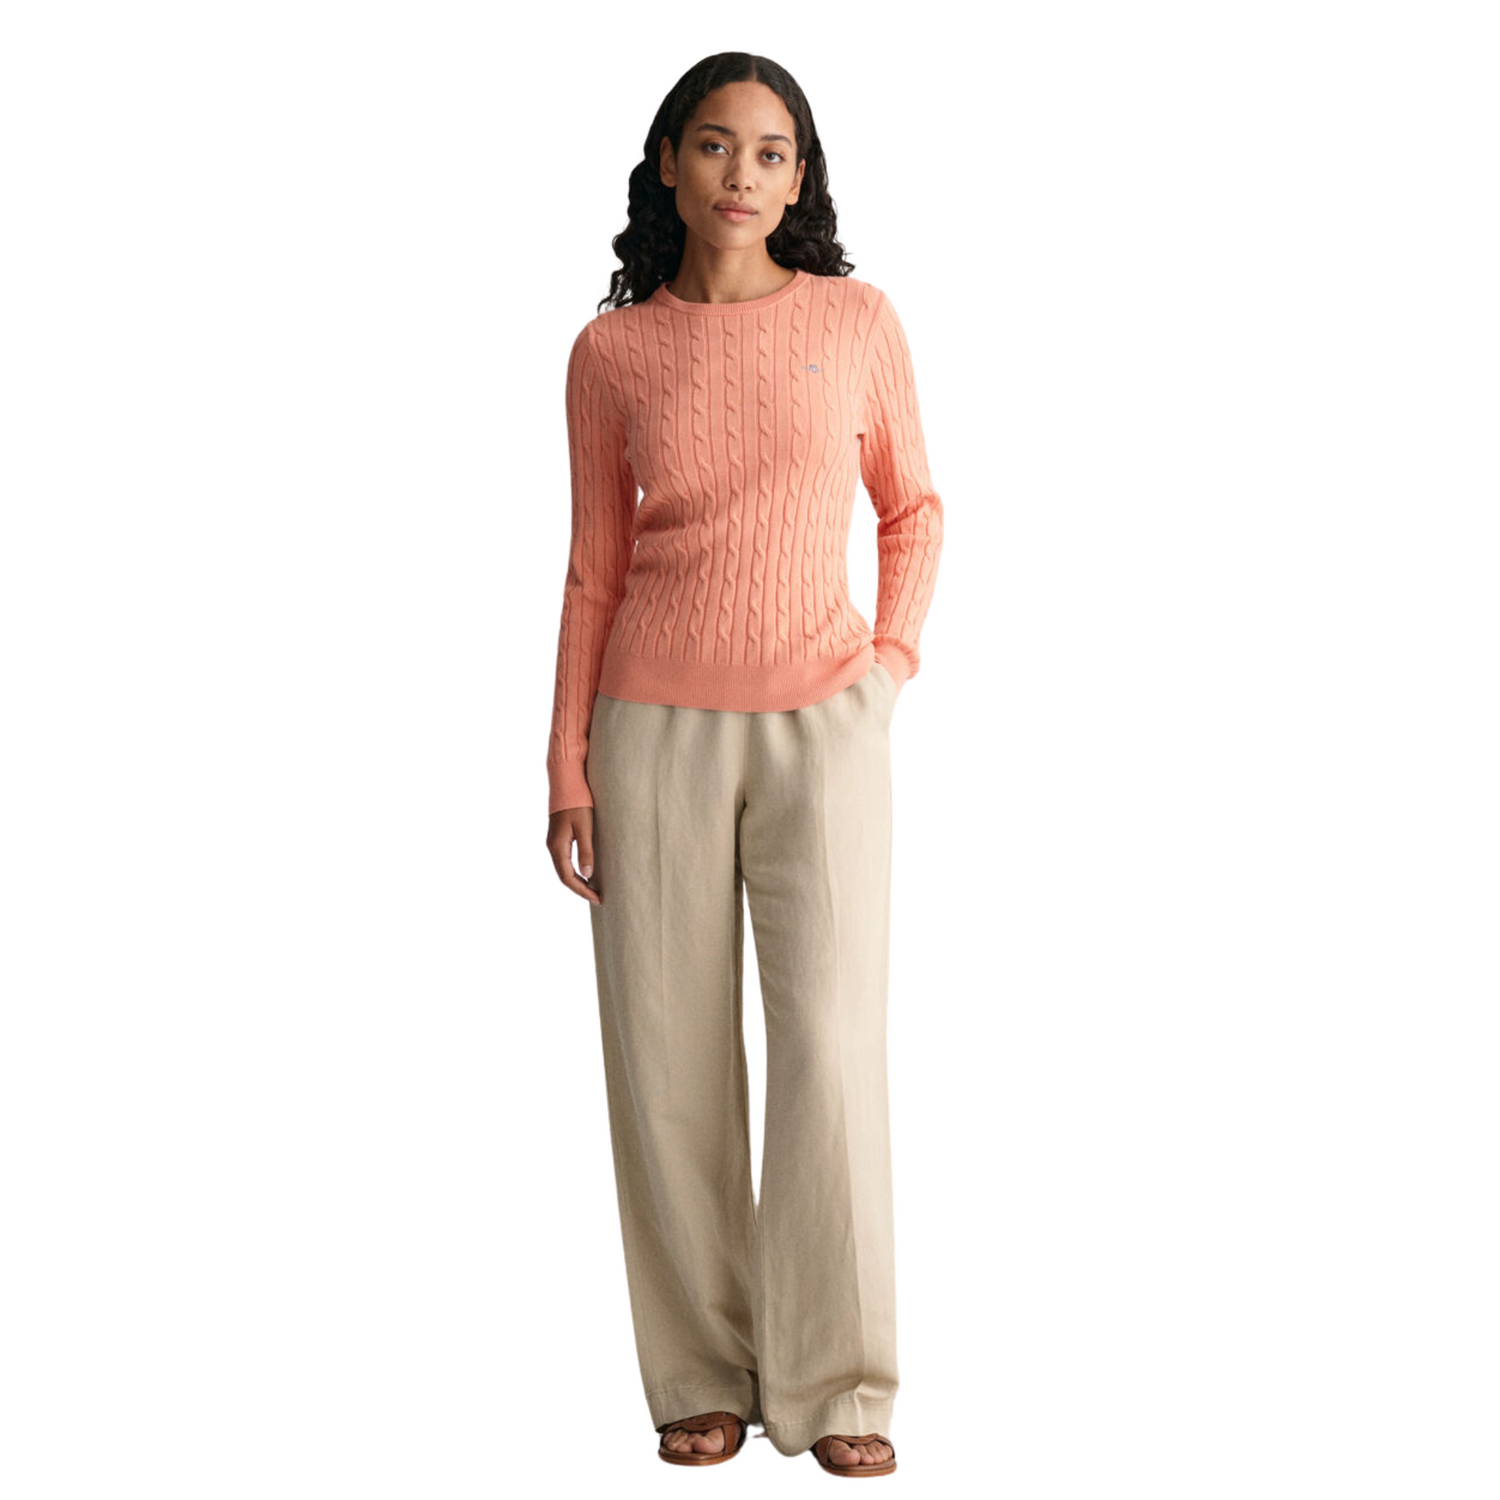 Stretch Cotton Cable Crew Neck Peachy Pink